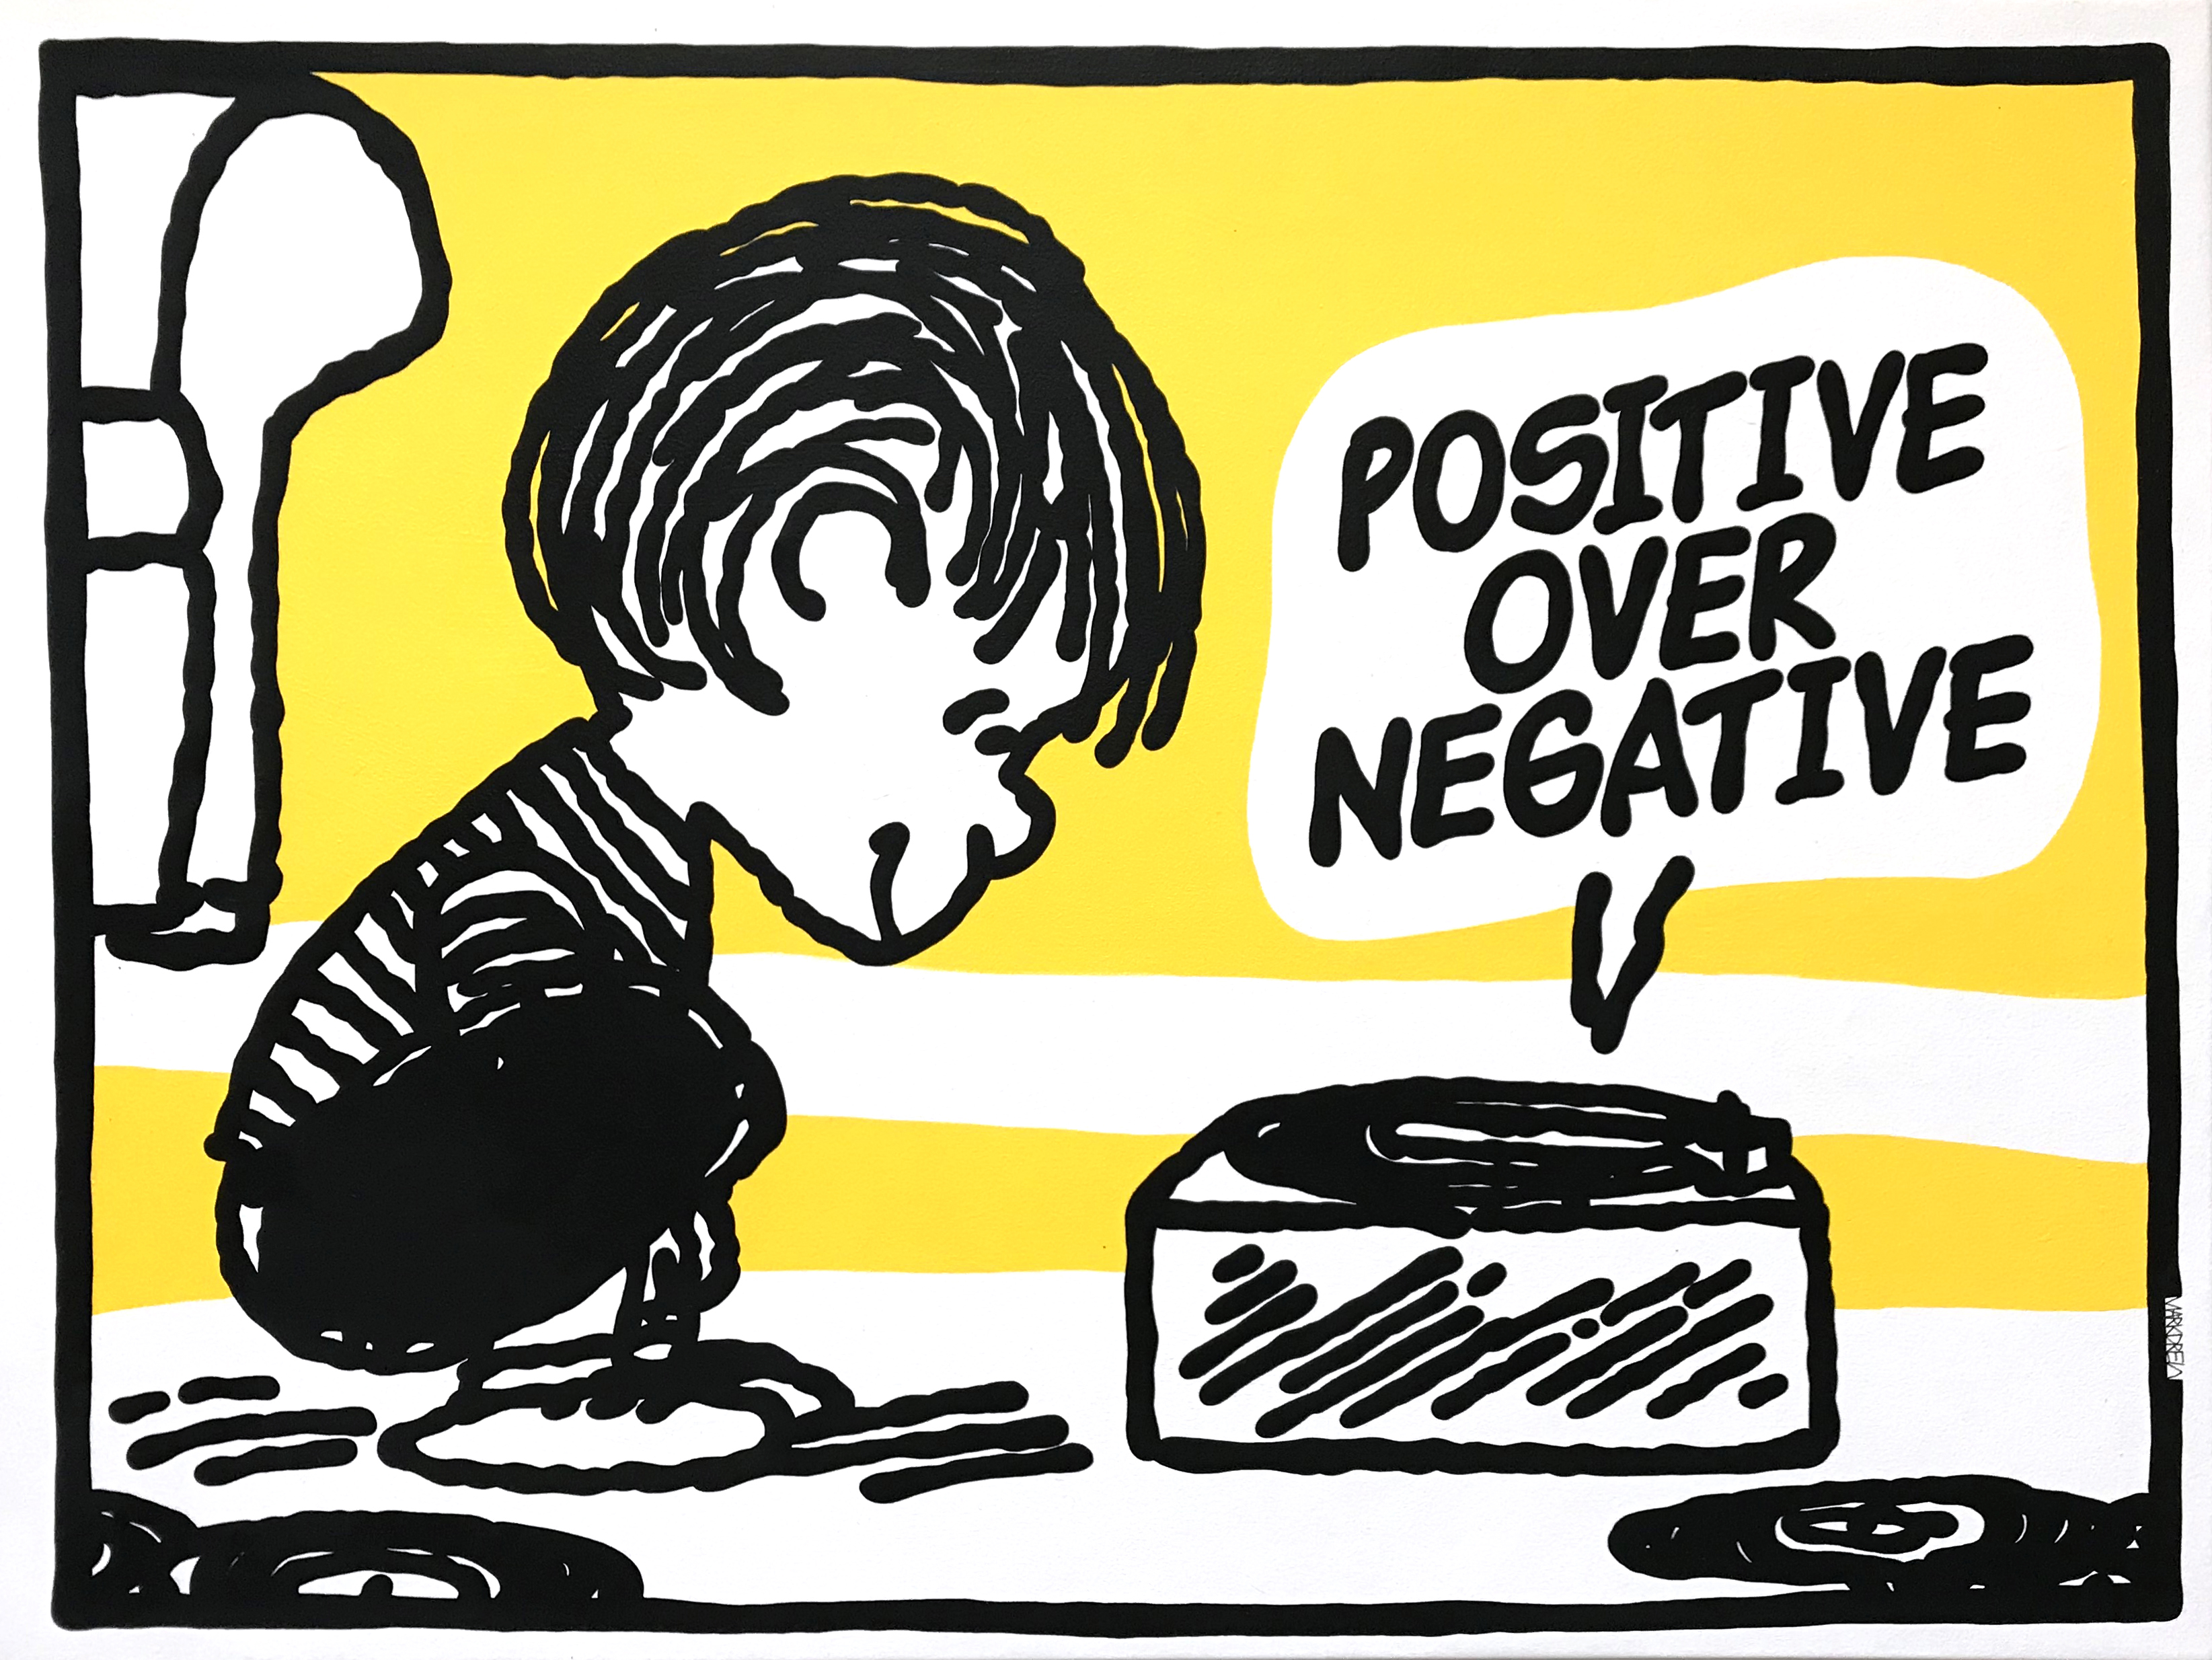 Mark Drew, Positive Over Negative [CL Smooth], Courtesy of the artist.